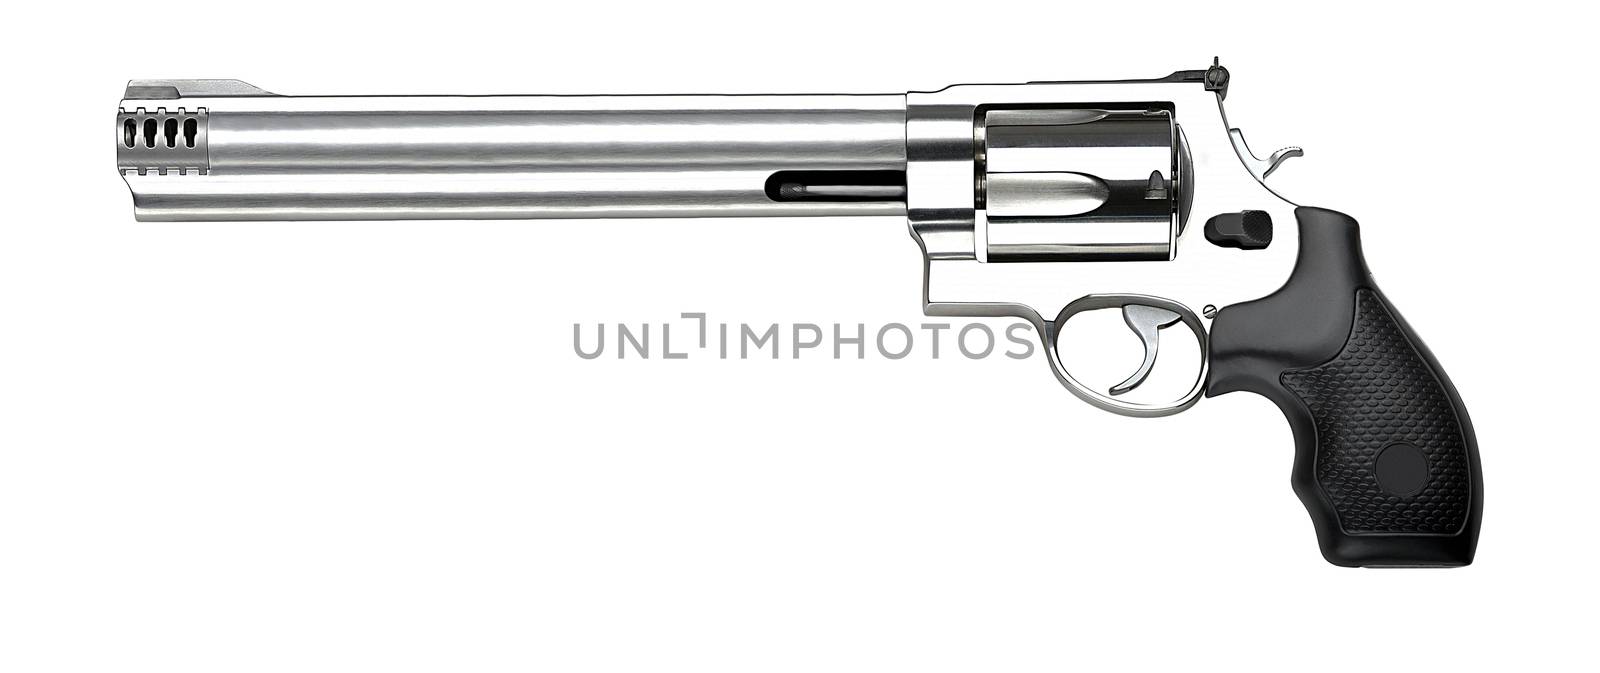 Old revolver on white background with clipping path 